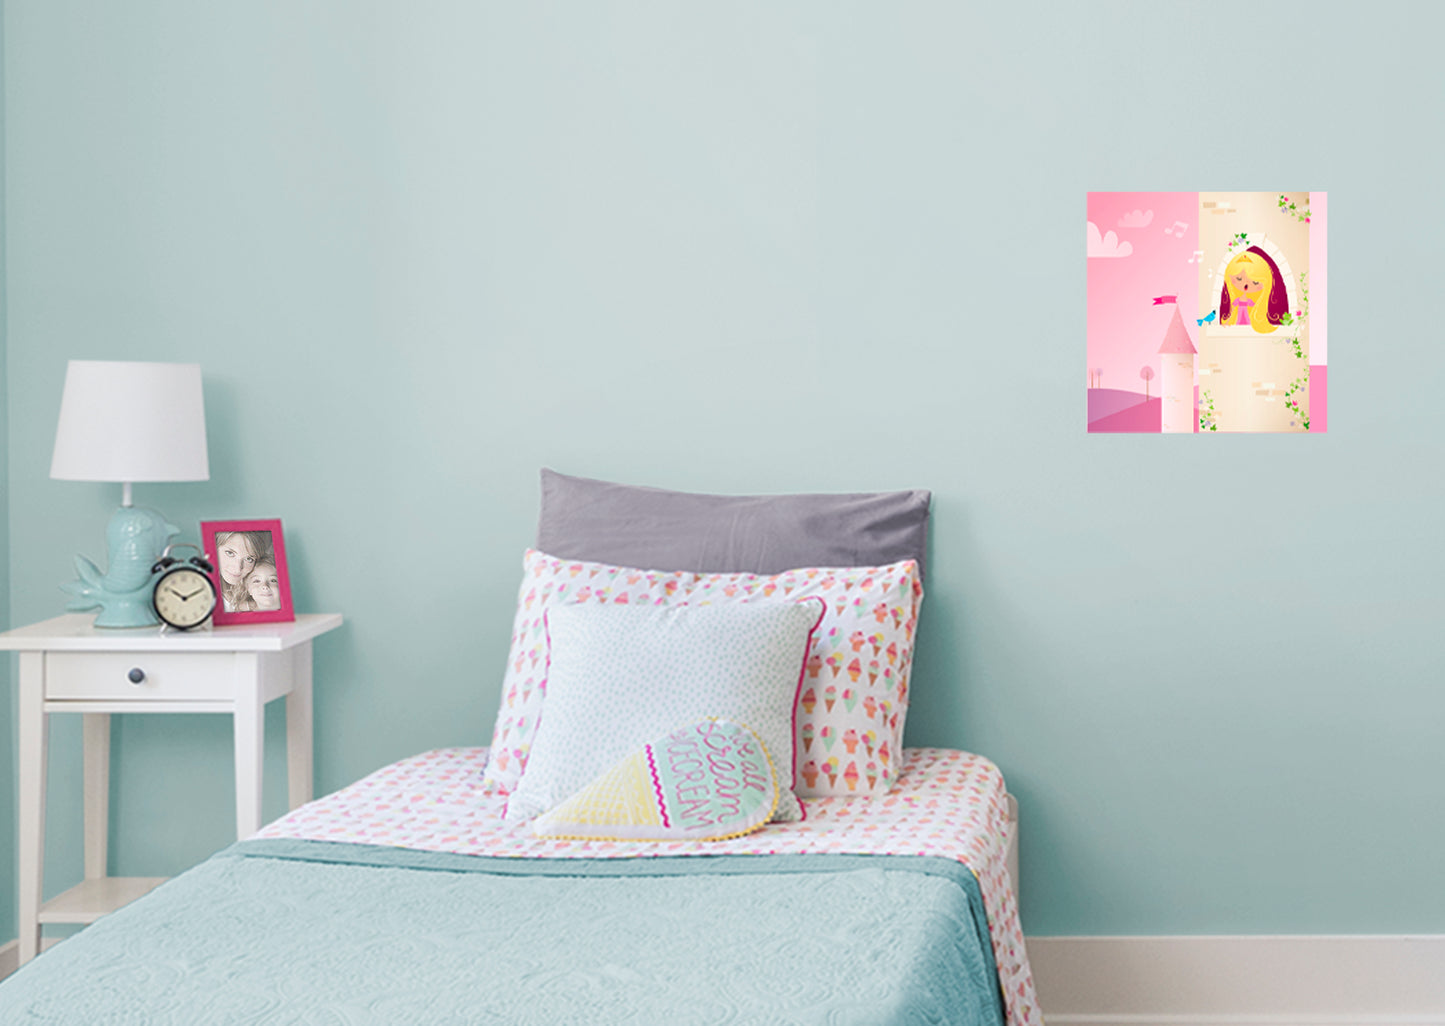 Nursery:  Singing Mural        -   Removable Wall   Adhesive Decal